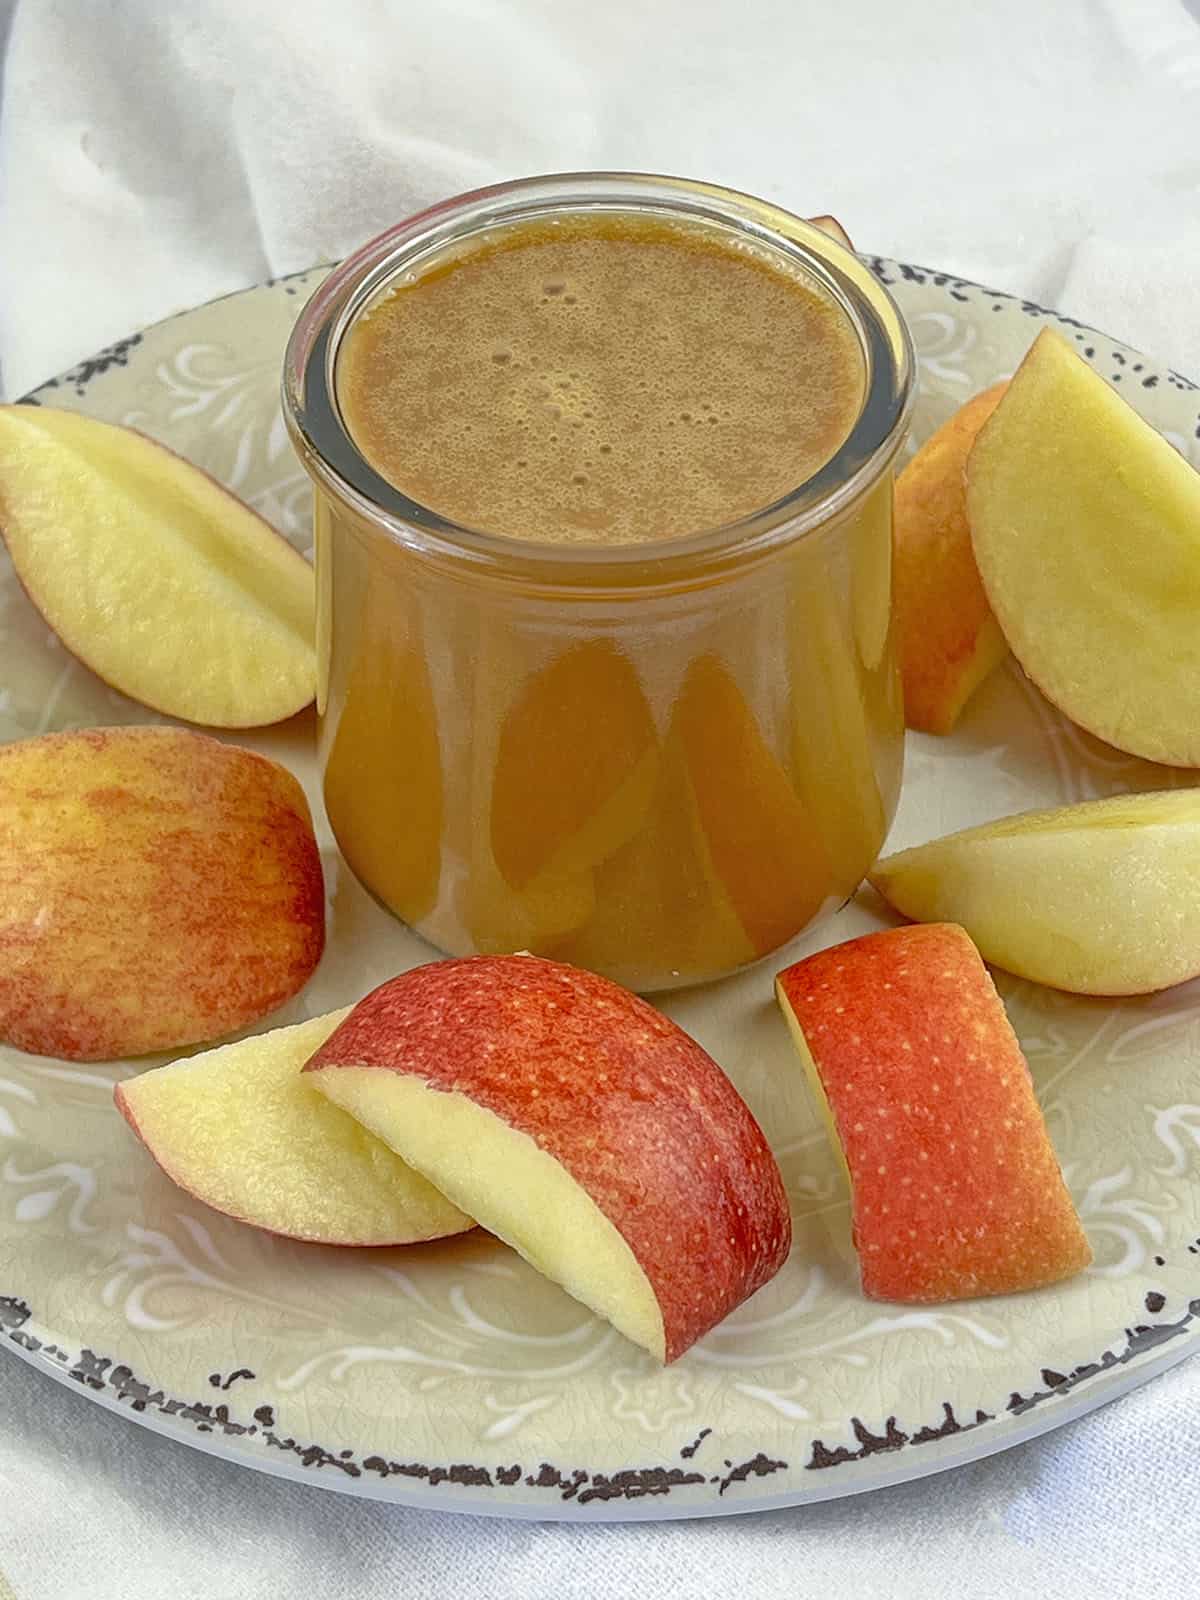 Caramel sauce in a glass jar with cut fruit around it.